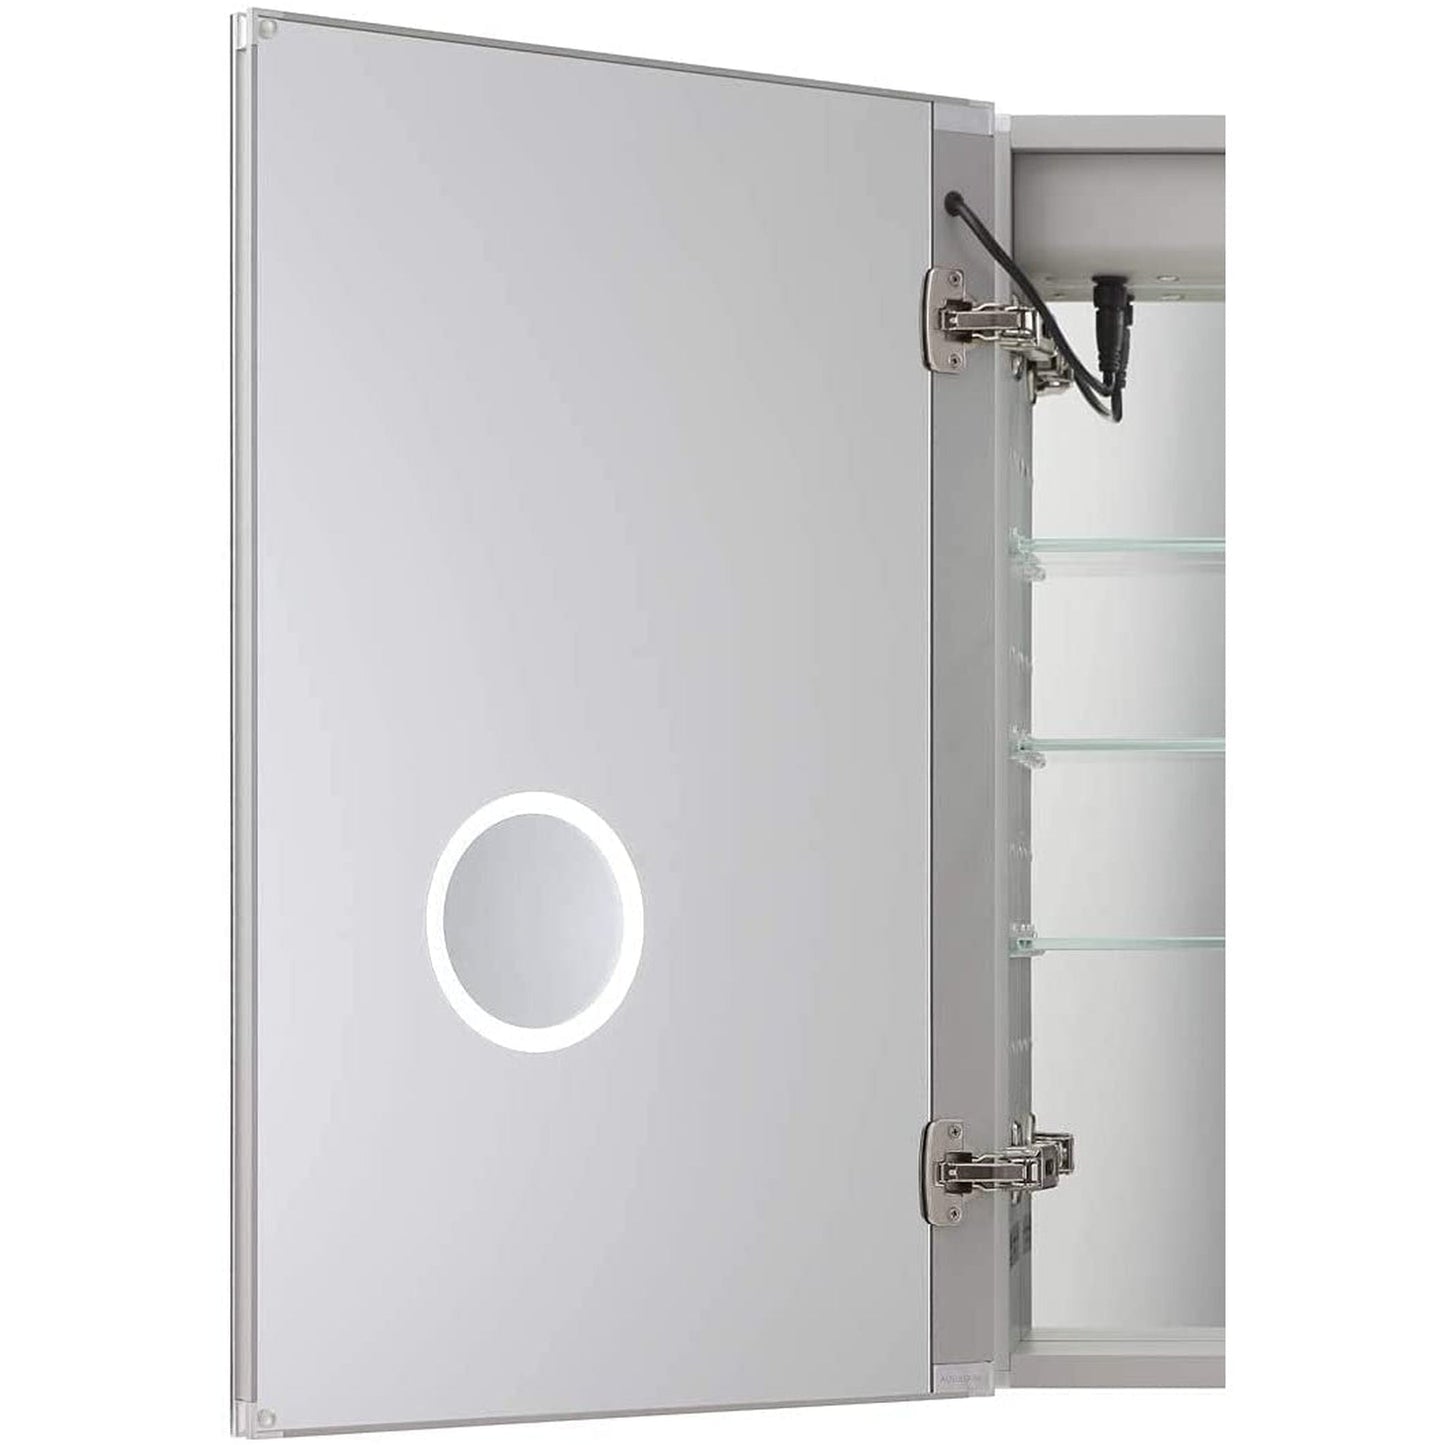 Aquadom Royale Plus 36" x 30" Extra Depth Rectangle Recessed or Surface Mount Bi-View LED Lighted Bathroom Medicine Cabinet With Defogger, Electrical Outlet, Magnifying Mirror